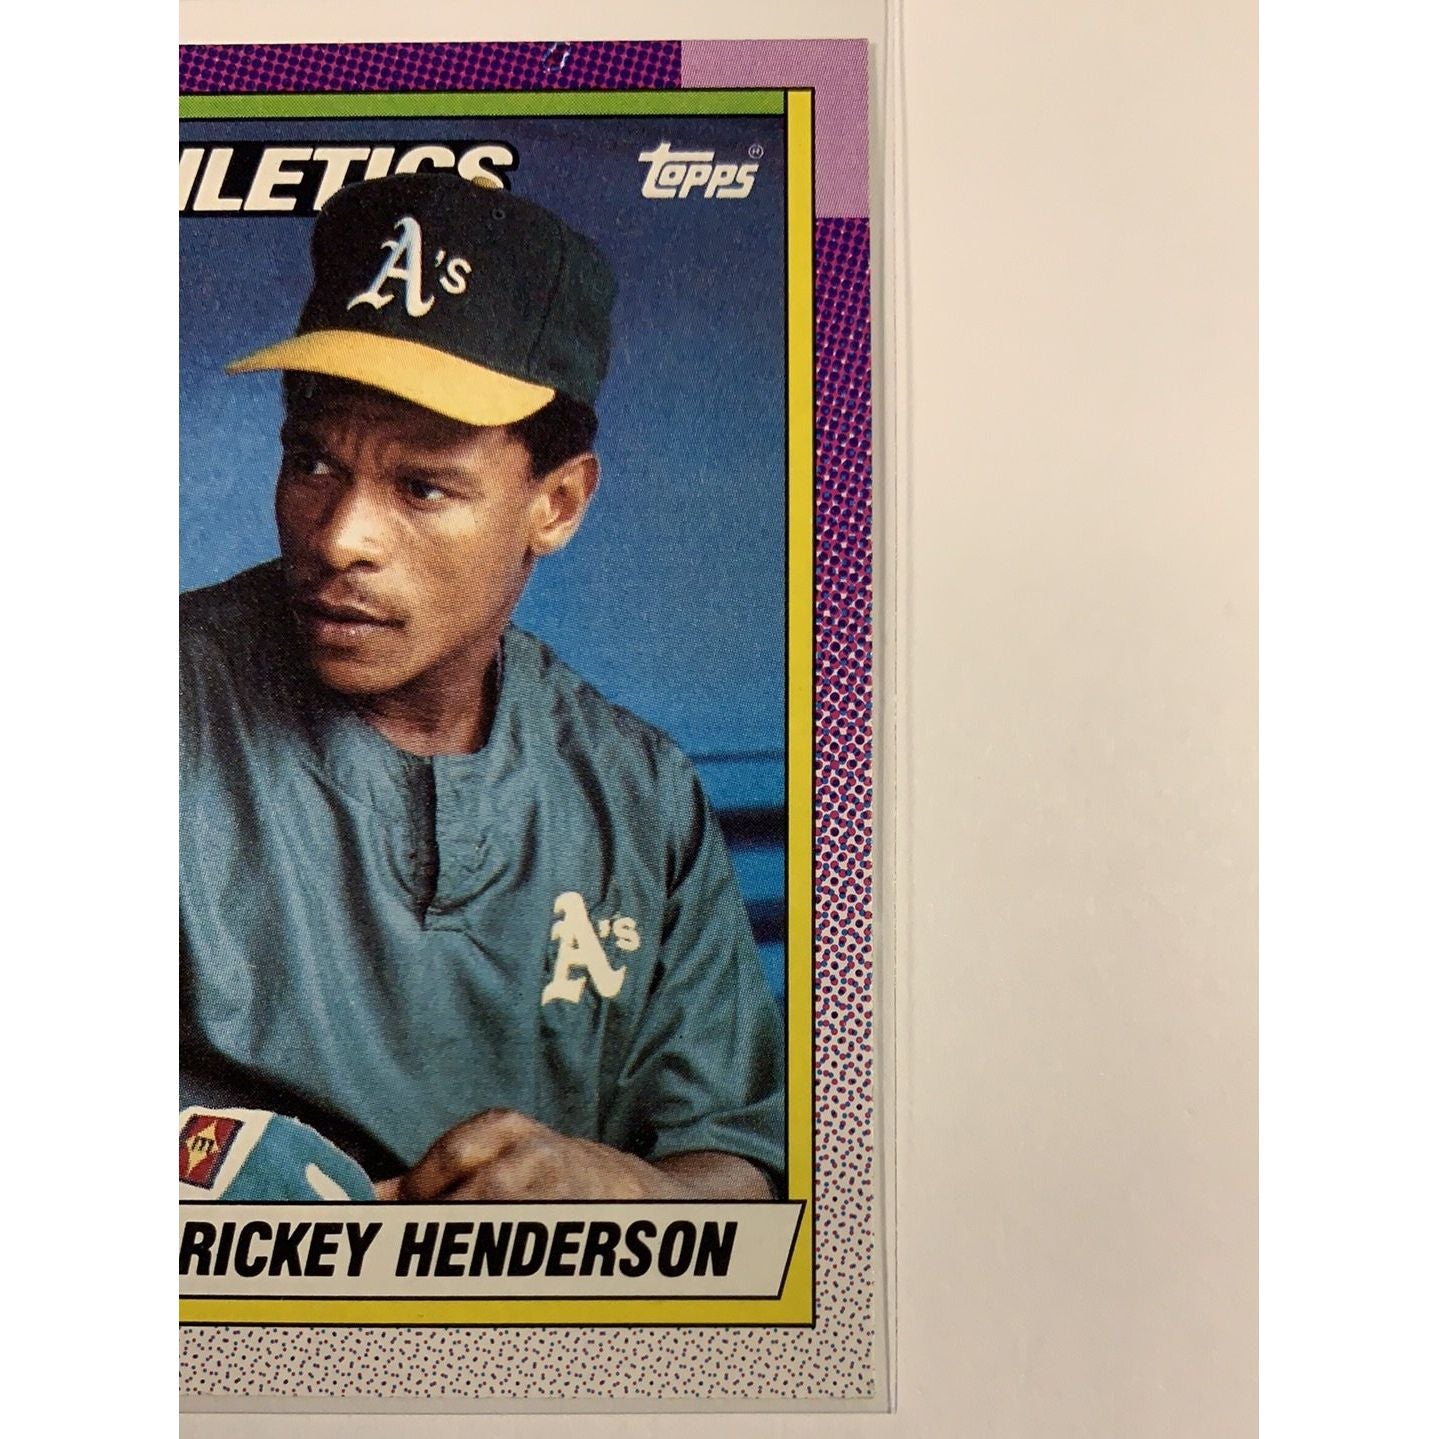  1990 Topps Rickey Henderson #450  Local Legends Cards & Collectibles